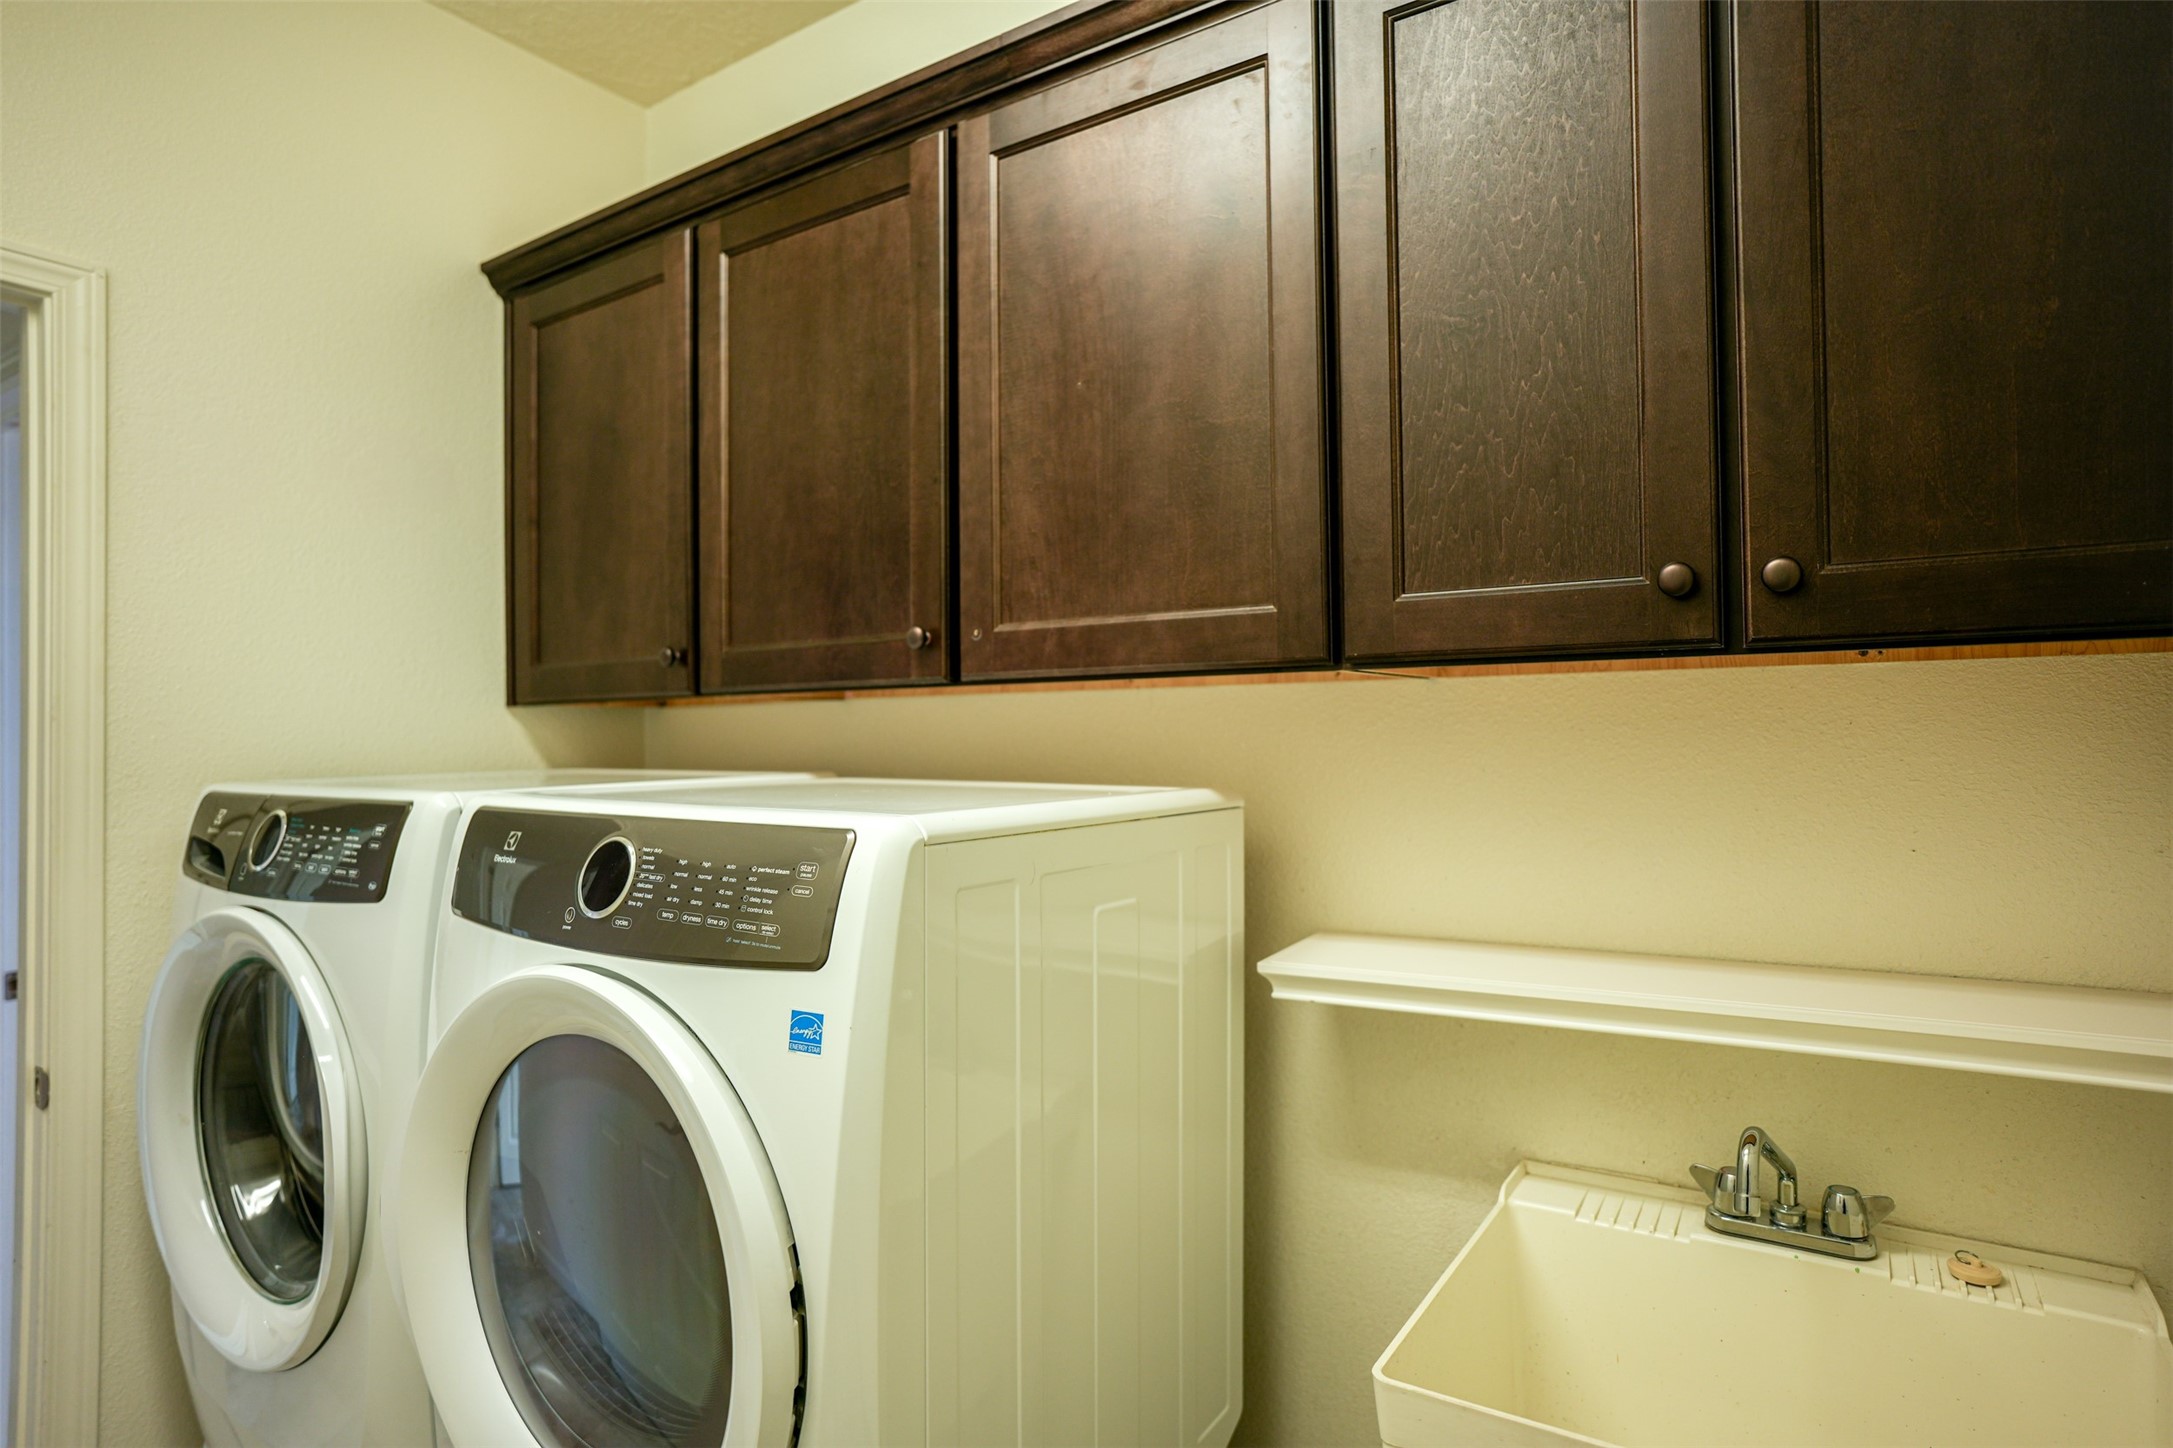 LAUNDRY ROOM WITH UPPER BUILT-IN CABINETS